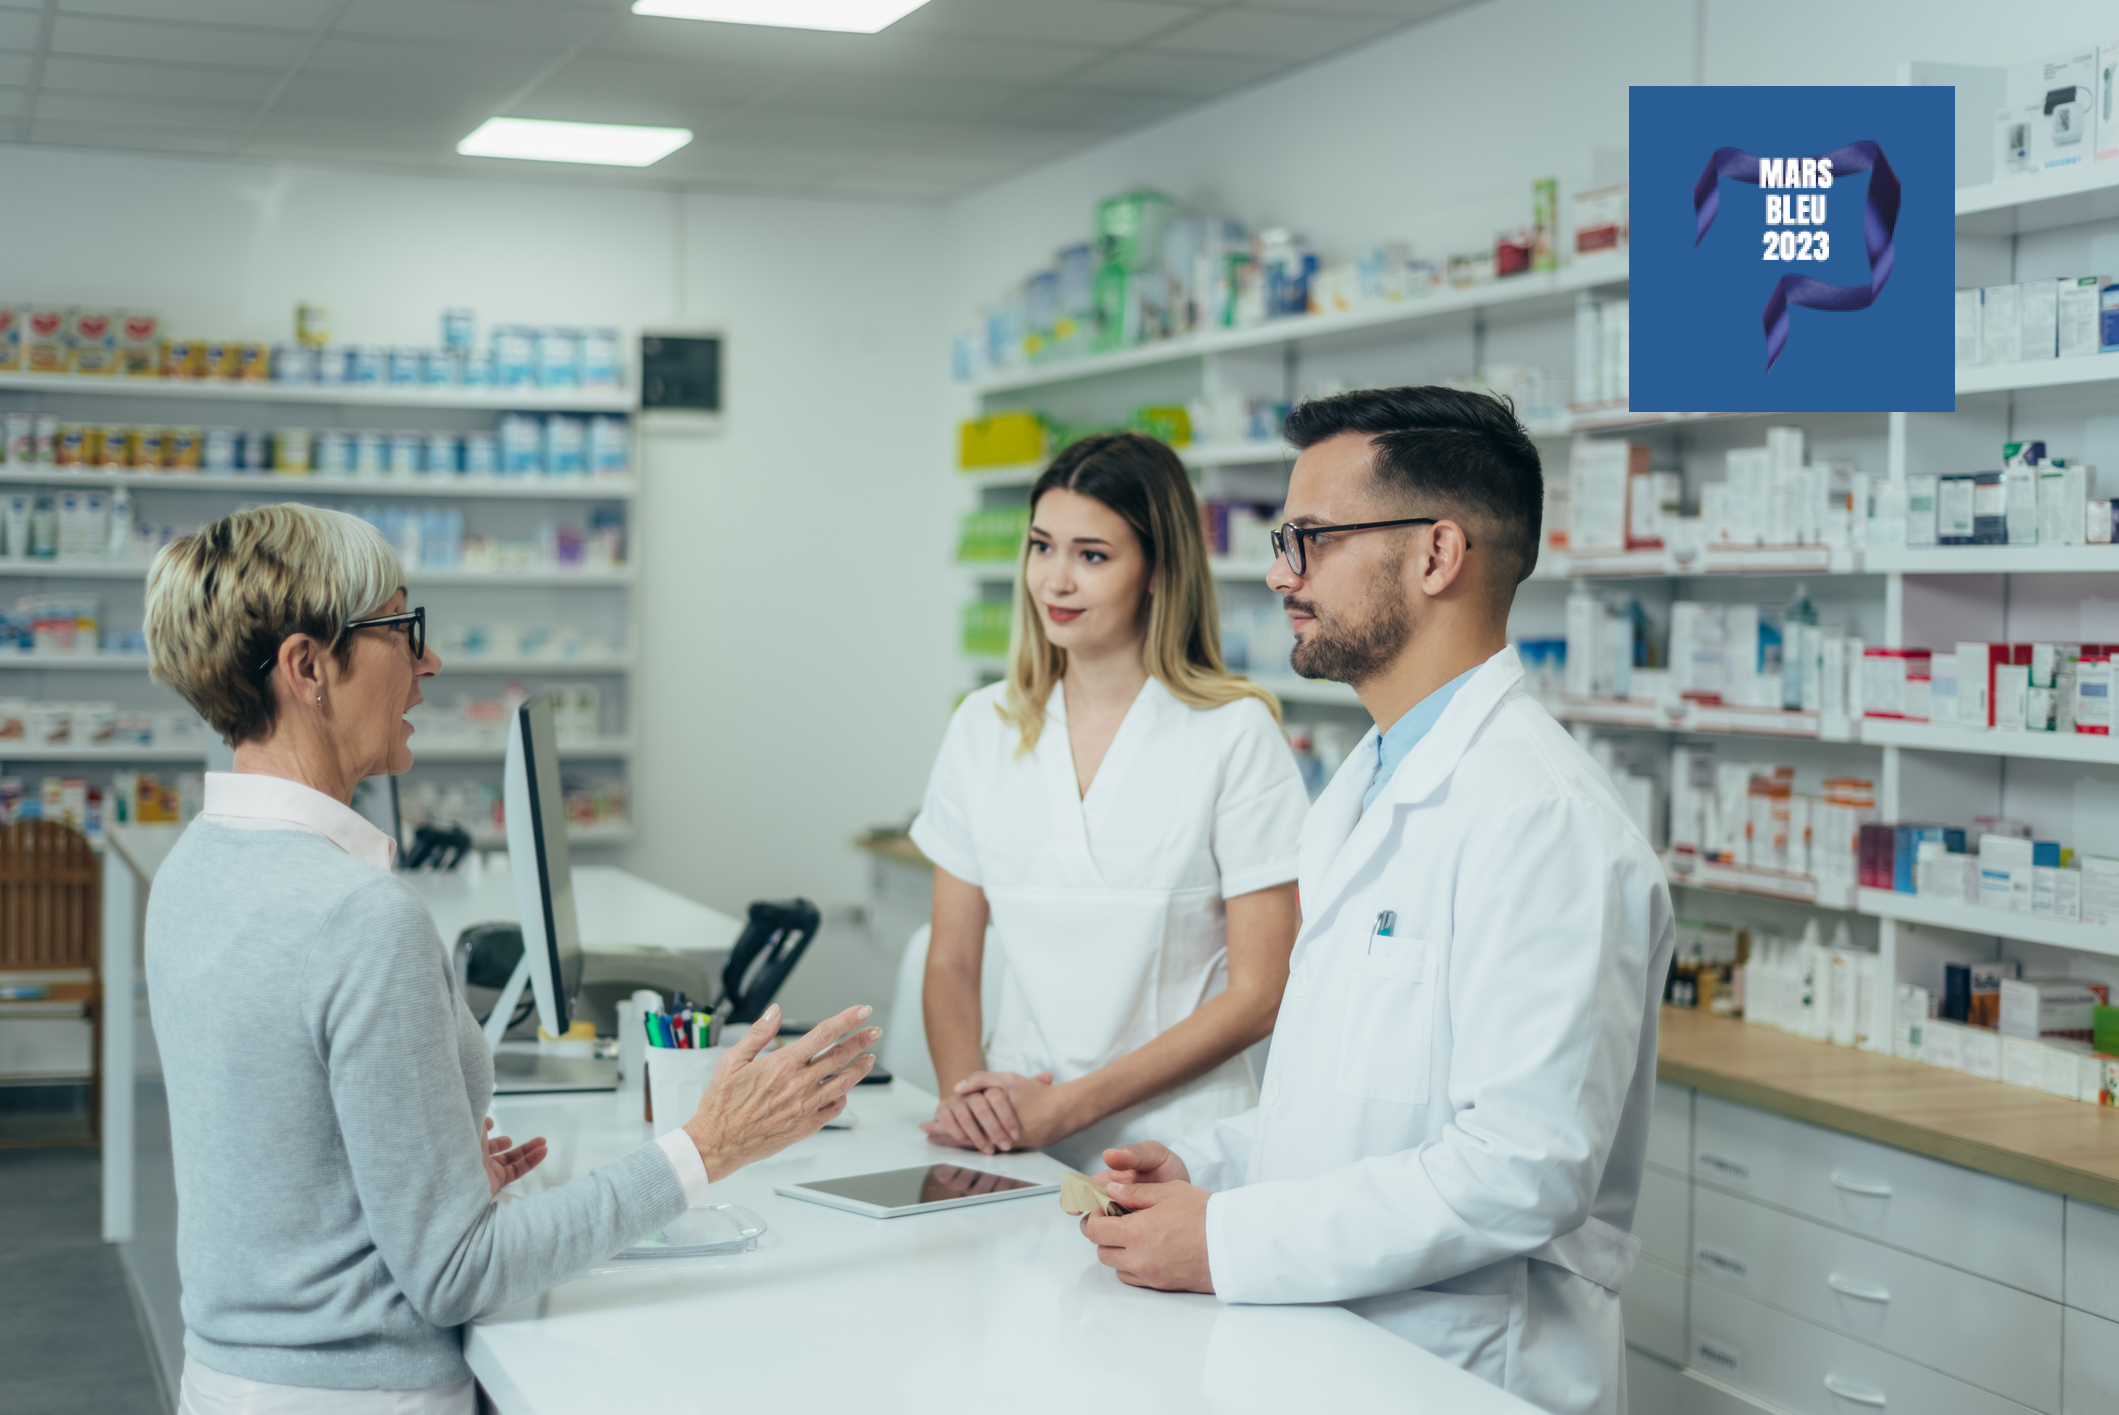 OG_TWO_PHARMACISTS_GIVE_PRESCRIPTION_DRUGS_TO_AN_ELDERLY_CUSTOMER_IN_A_PHARMACY_ISTOCK_2023